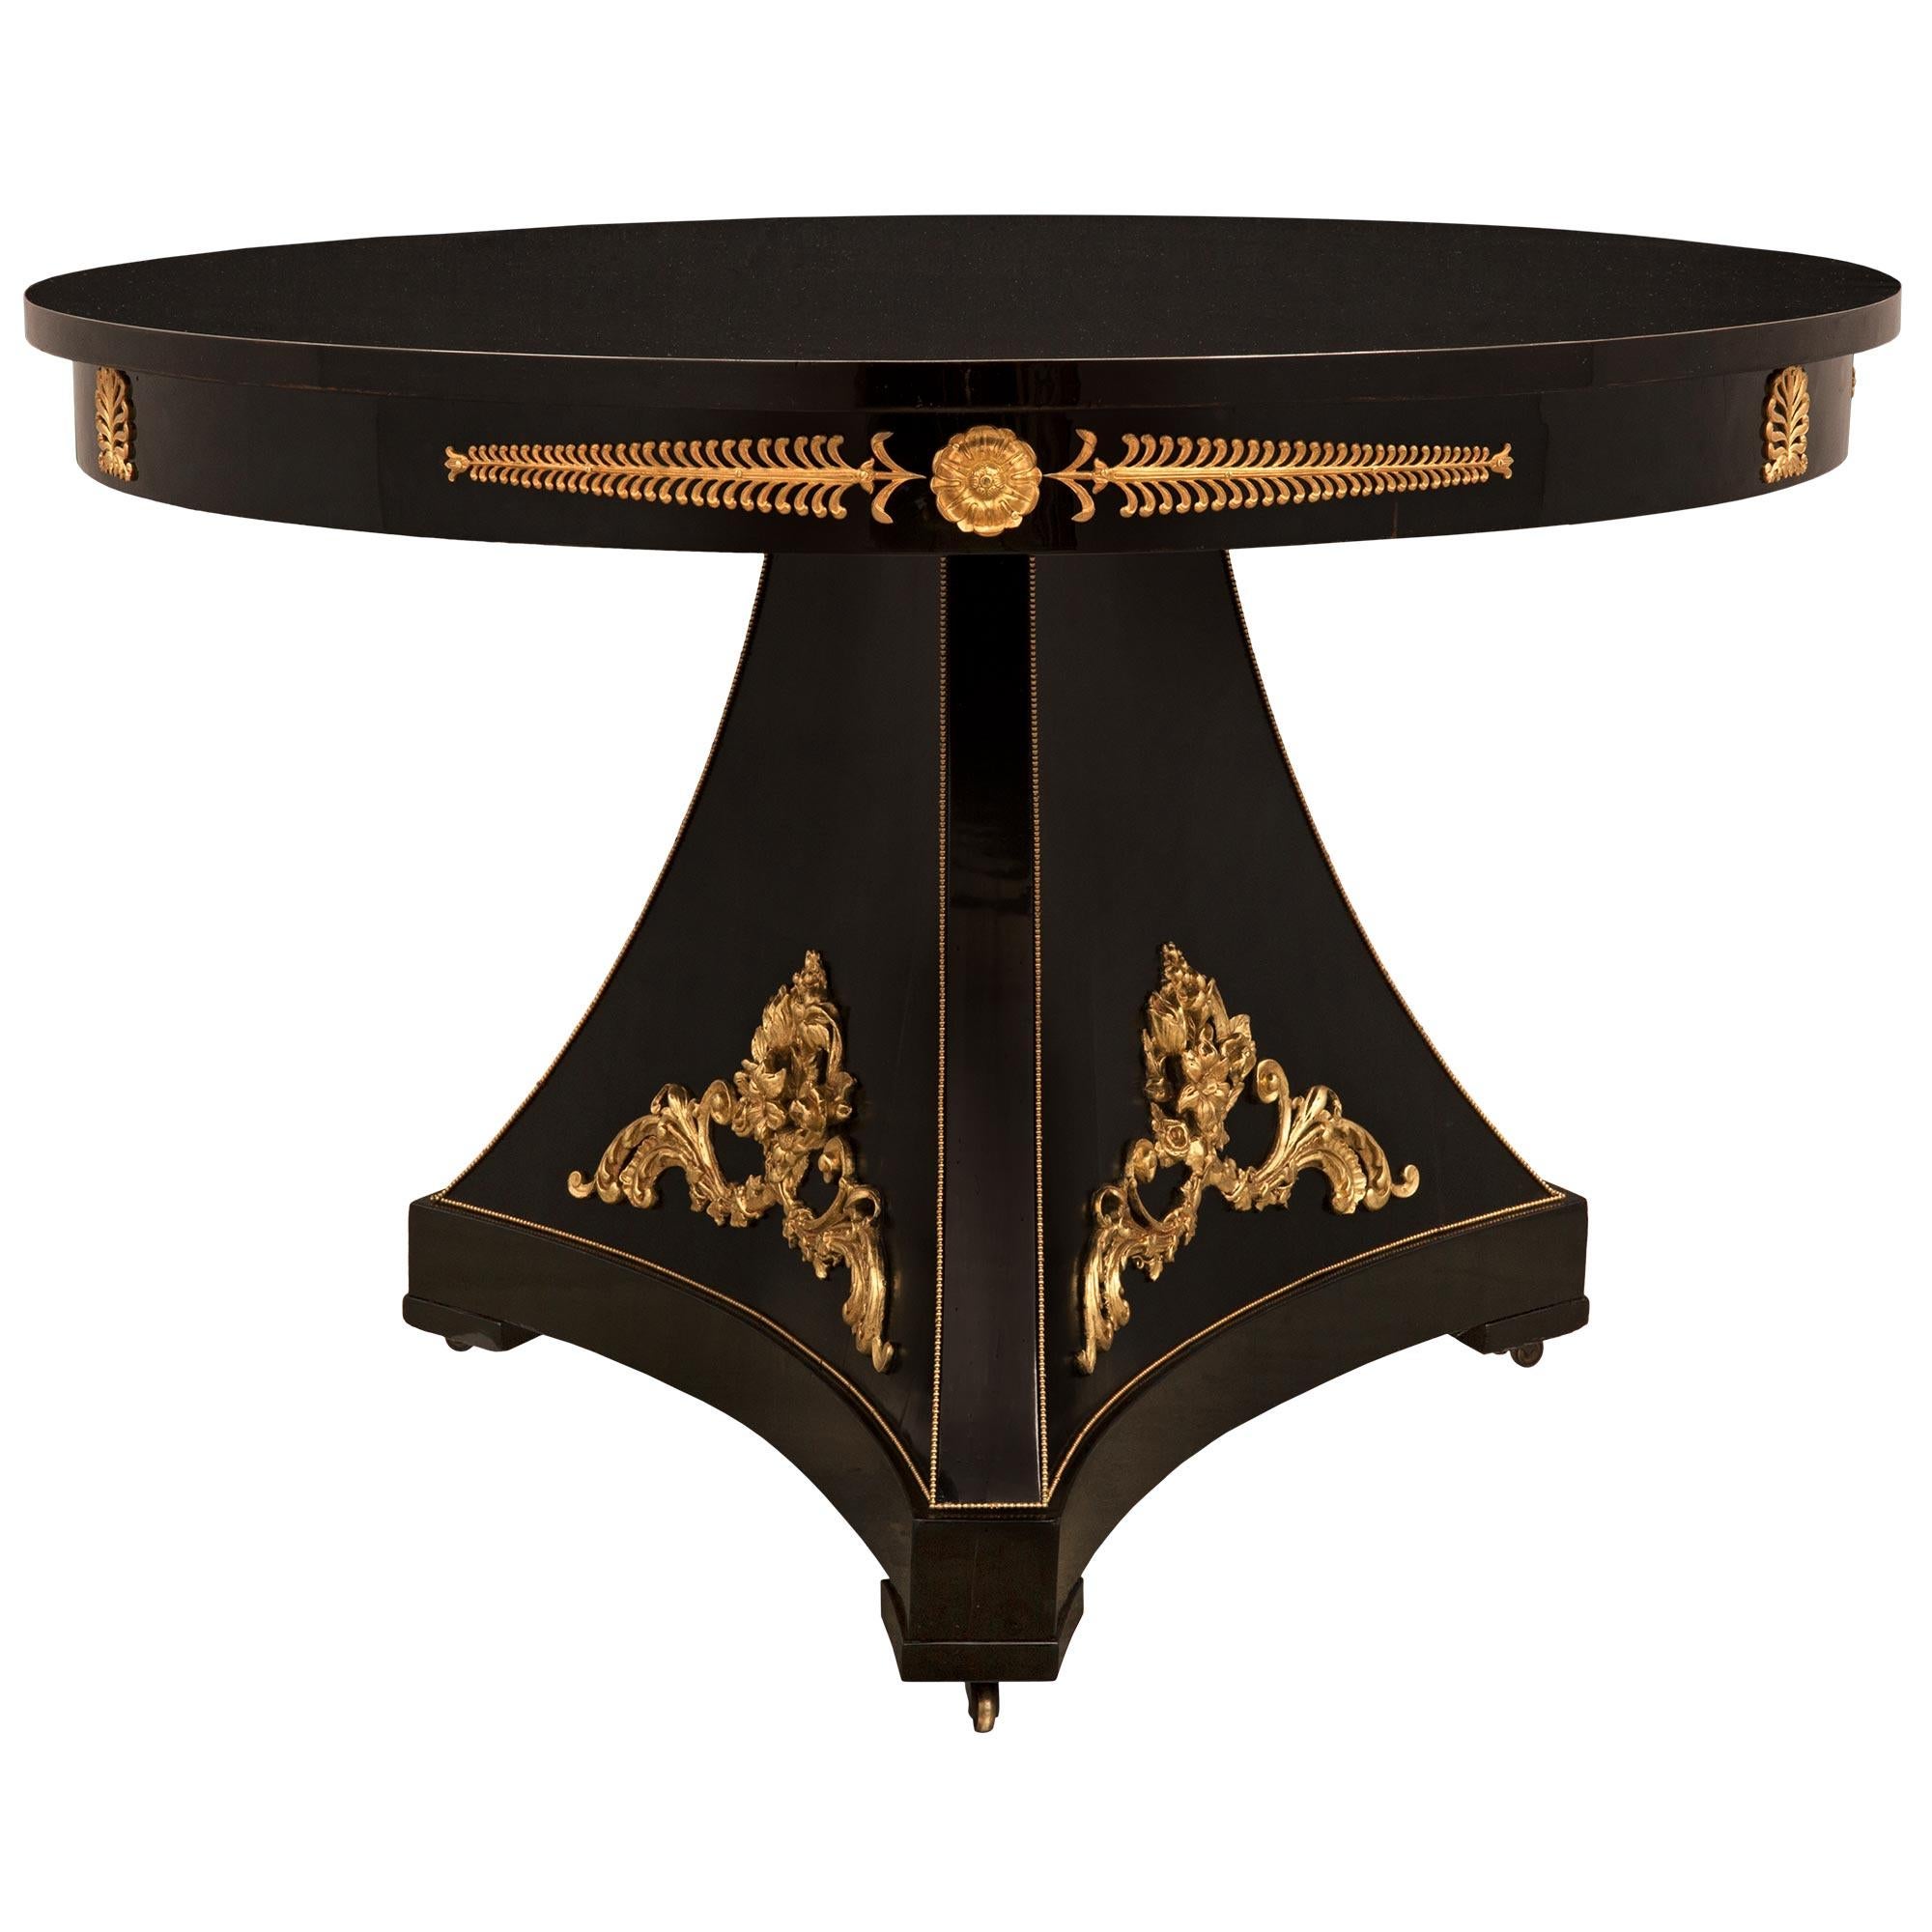 French 19th Century Napoleon III Period Ebony Ormolu and Giltwood Center Table In Good Condition For Sale In West Palm Beach, FL